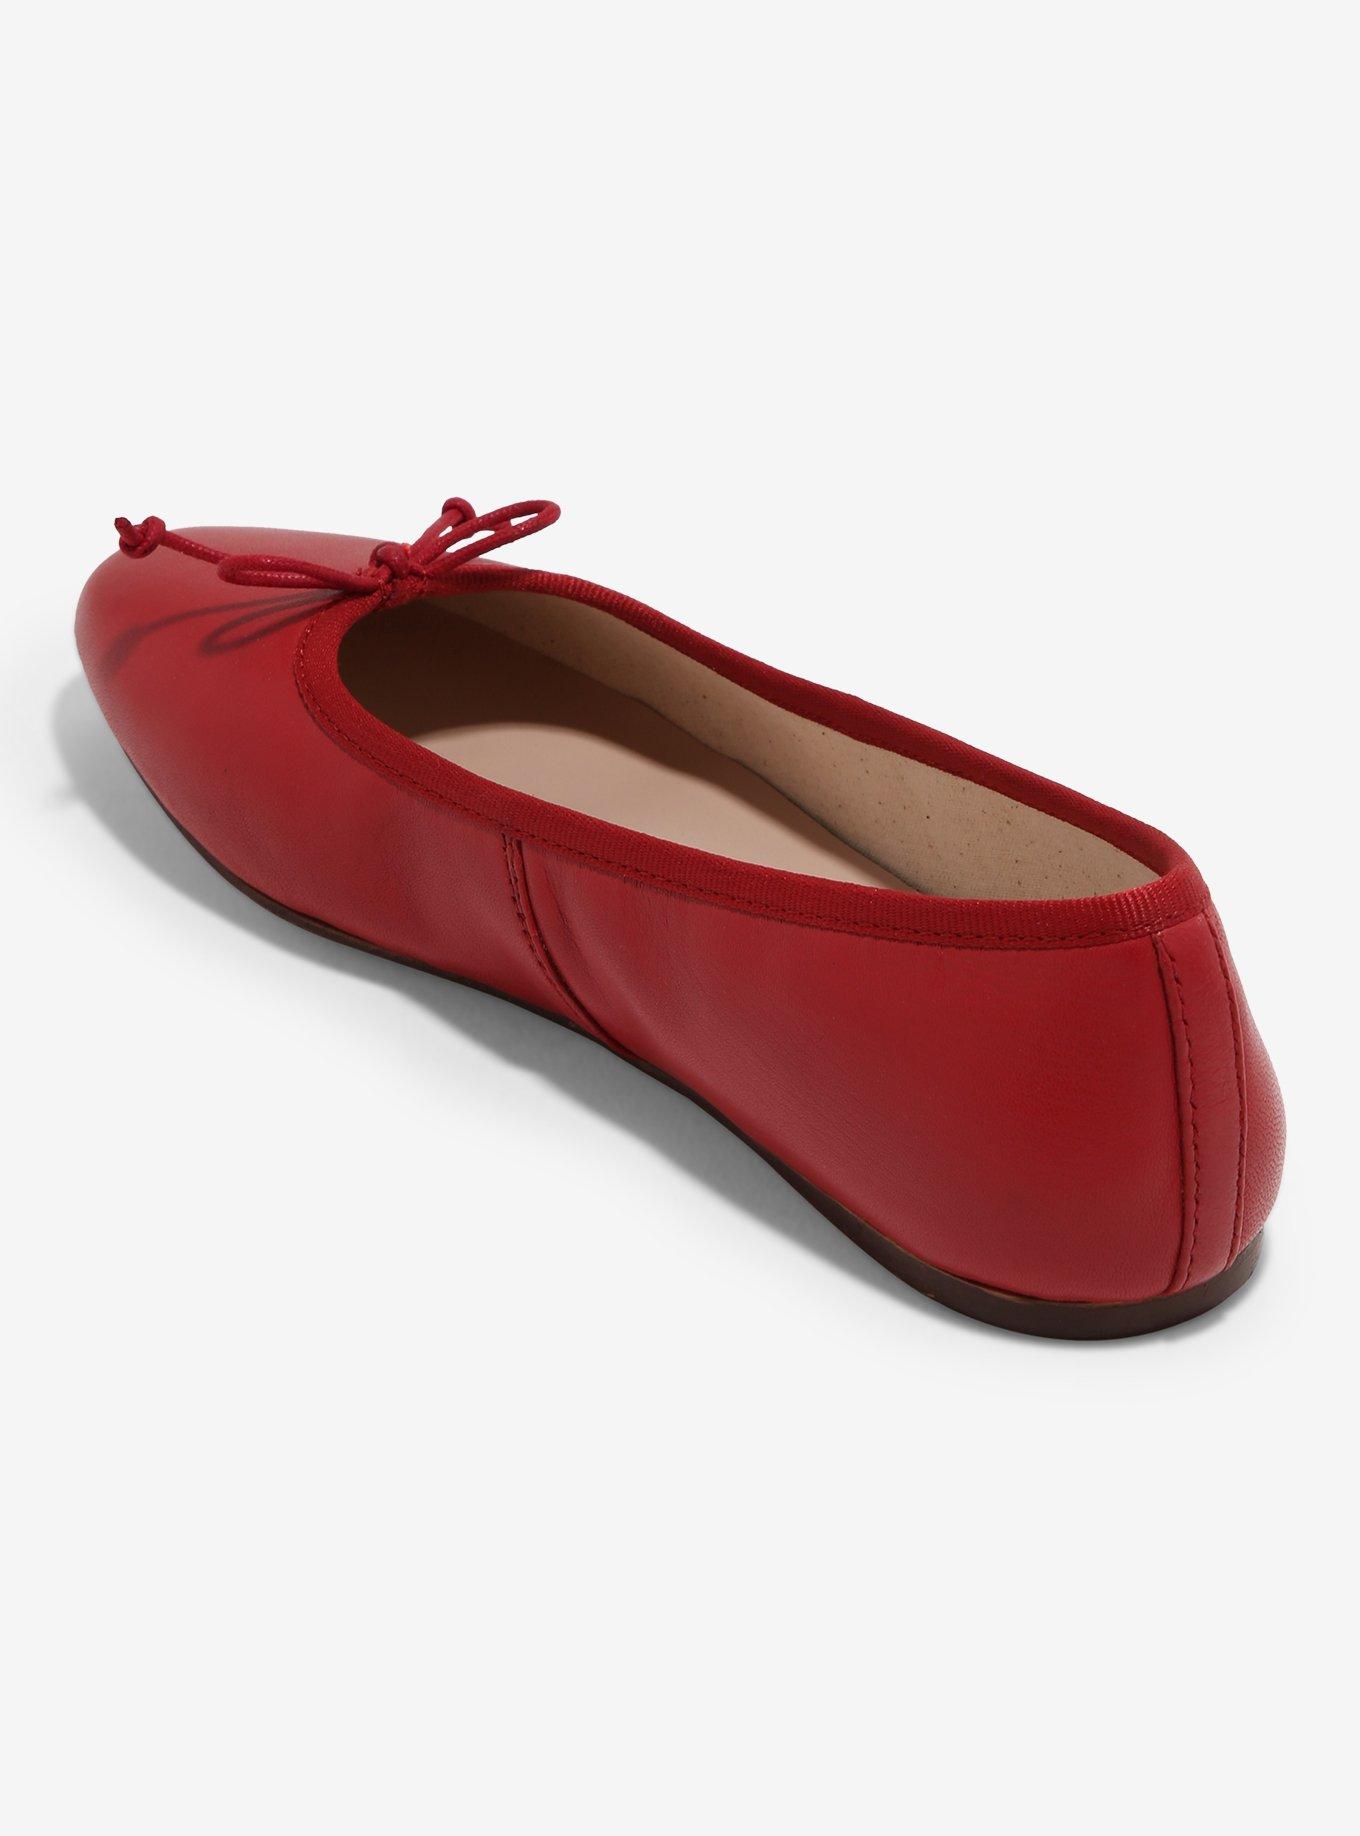 Chinese Laundry Red Ballet Flats, MULTI, alternate